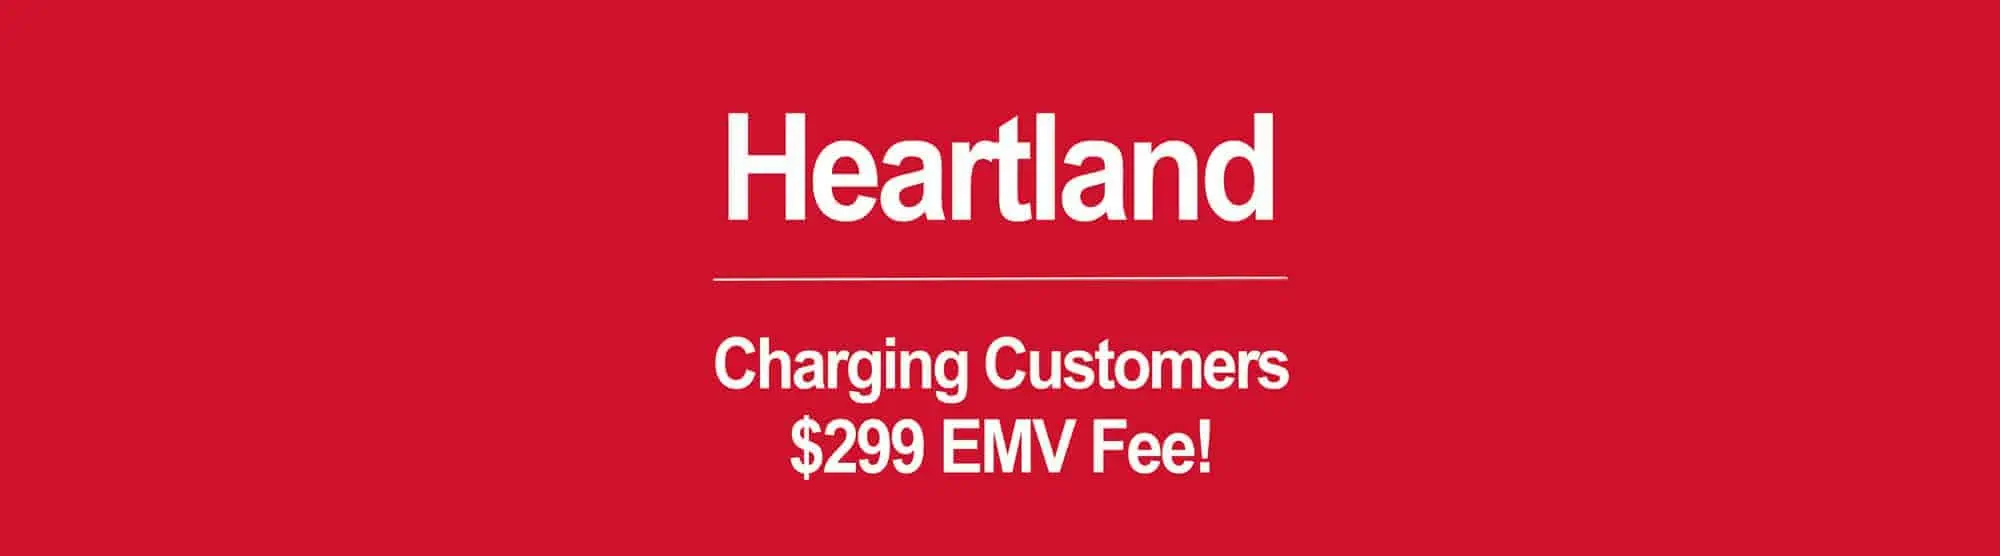 Heartland Payments charging EMV non-acceptance fee